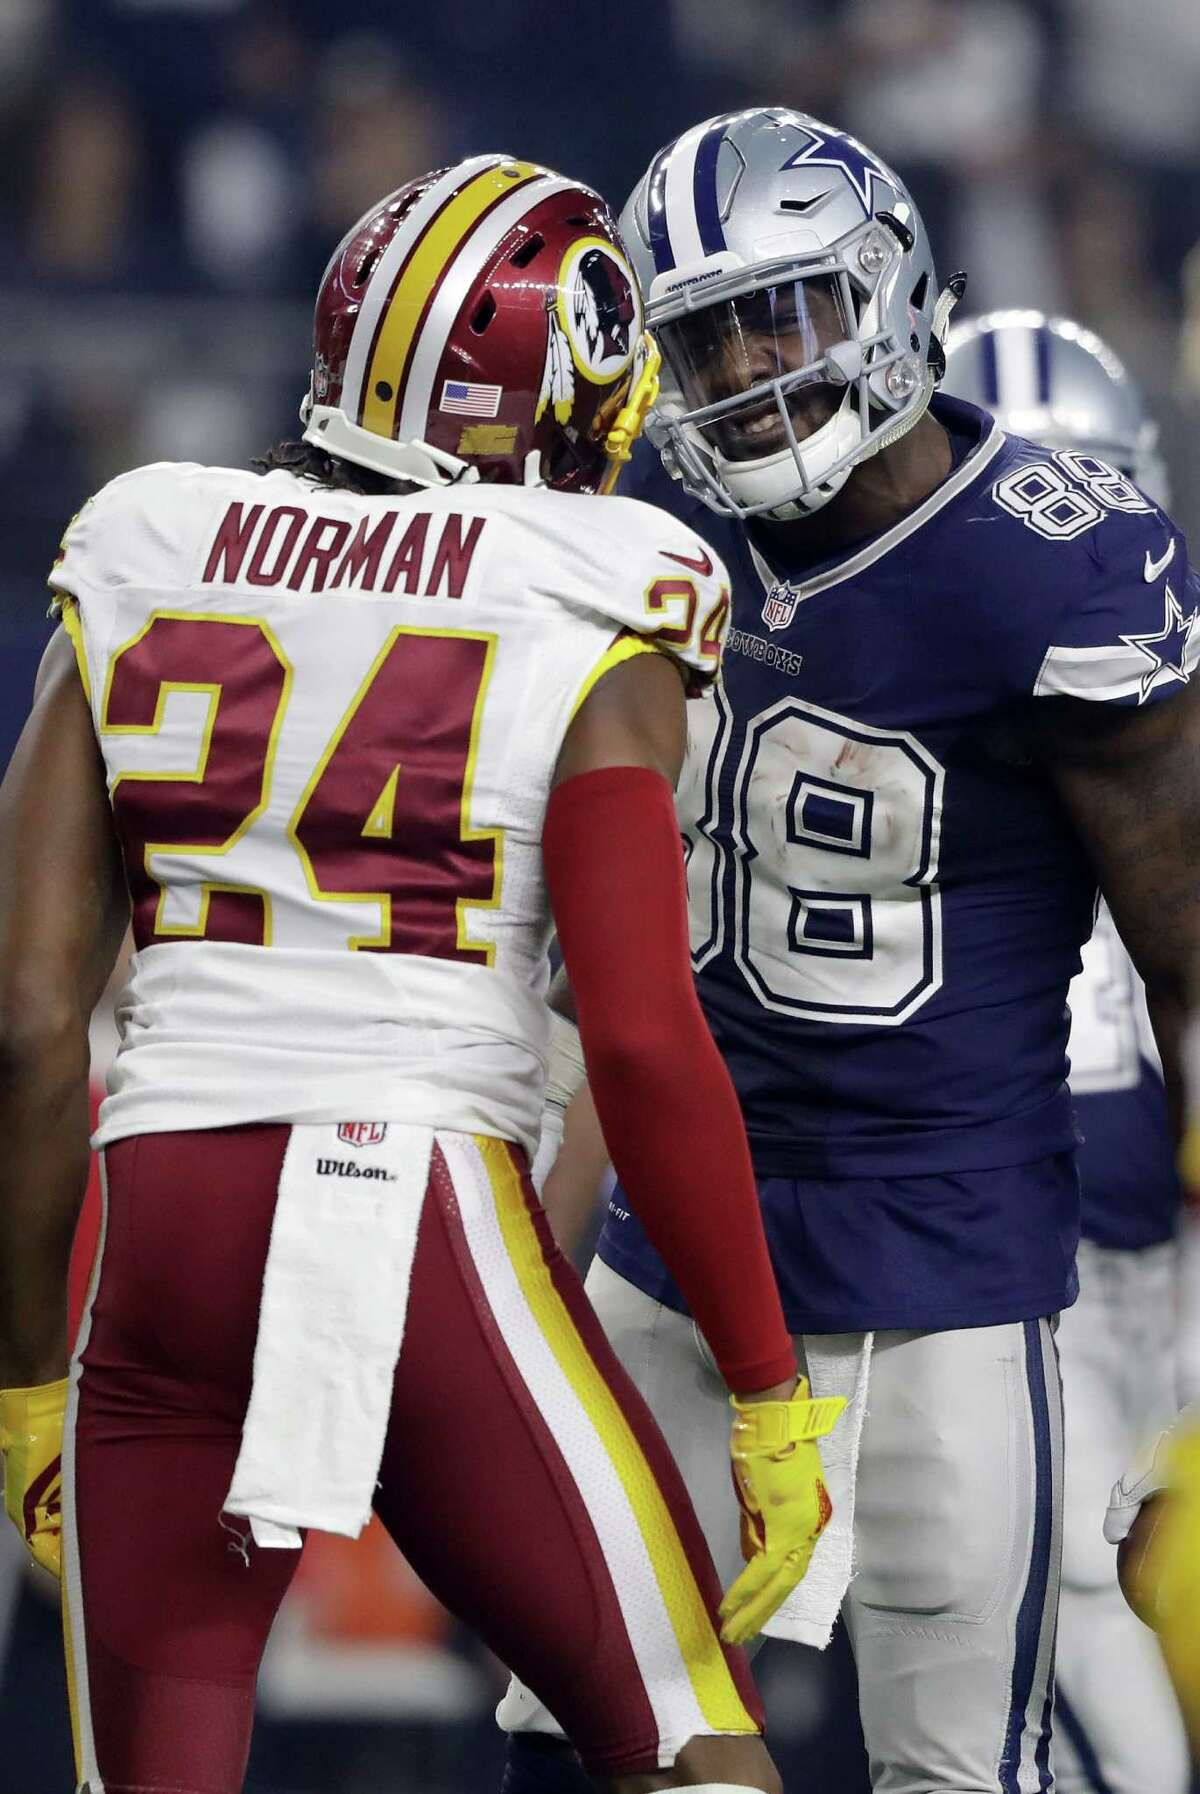 ARLINGTON, TX - NOVEMBER 24: Dez Bryant #88 of the Dallas Cowboys argues with Josh Norman #24 of the Washington Redskins after catching a pass in their game at AT&T Stadium on November 24, 2016 in Arlington, Texas. (Photo by Ronald Martinez/Getty Images) ORG XMIT: 663936901